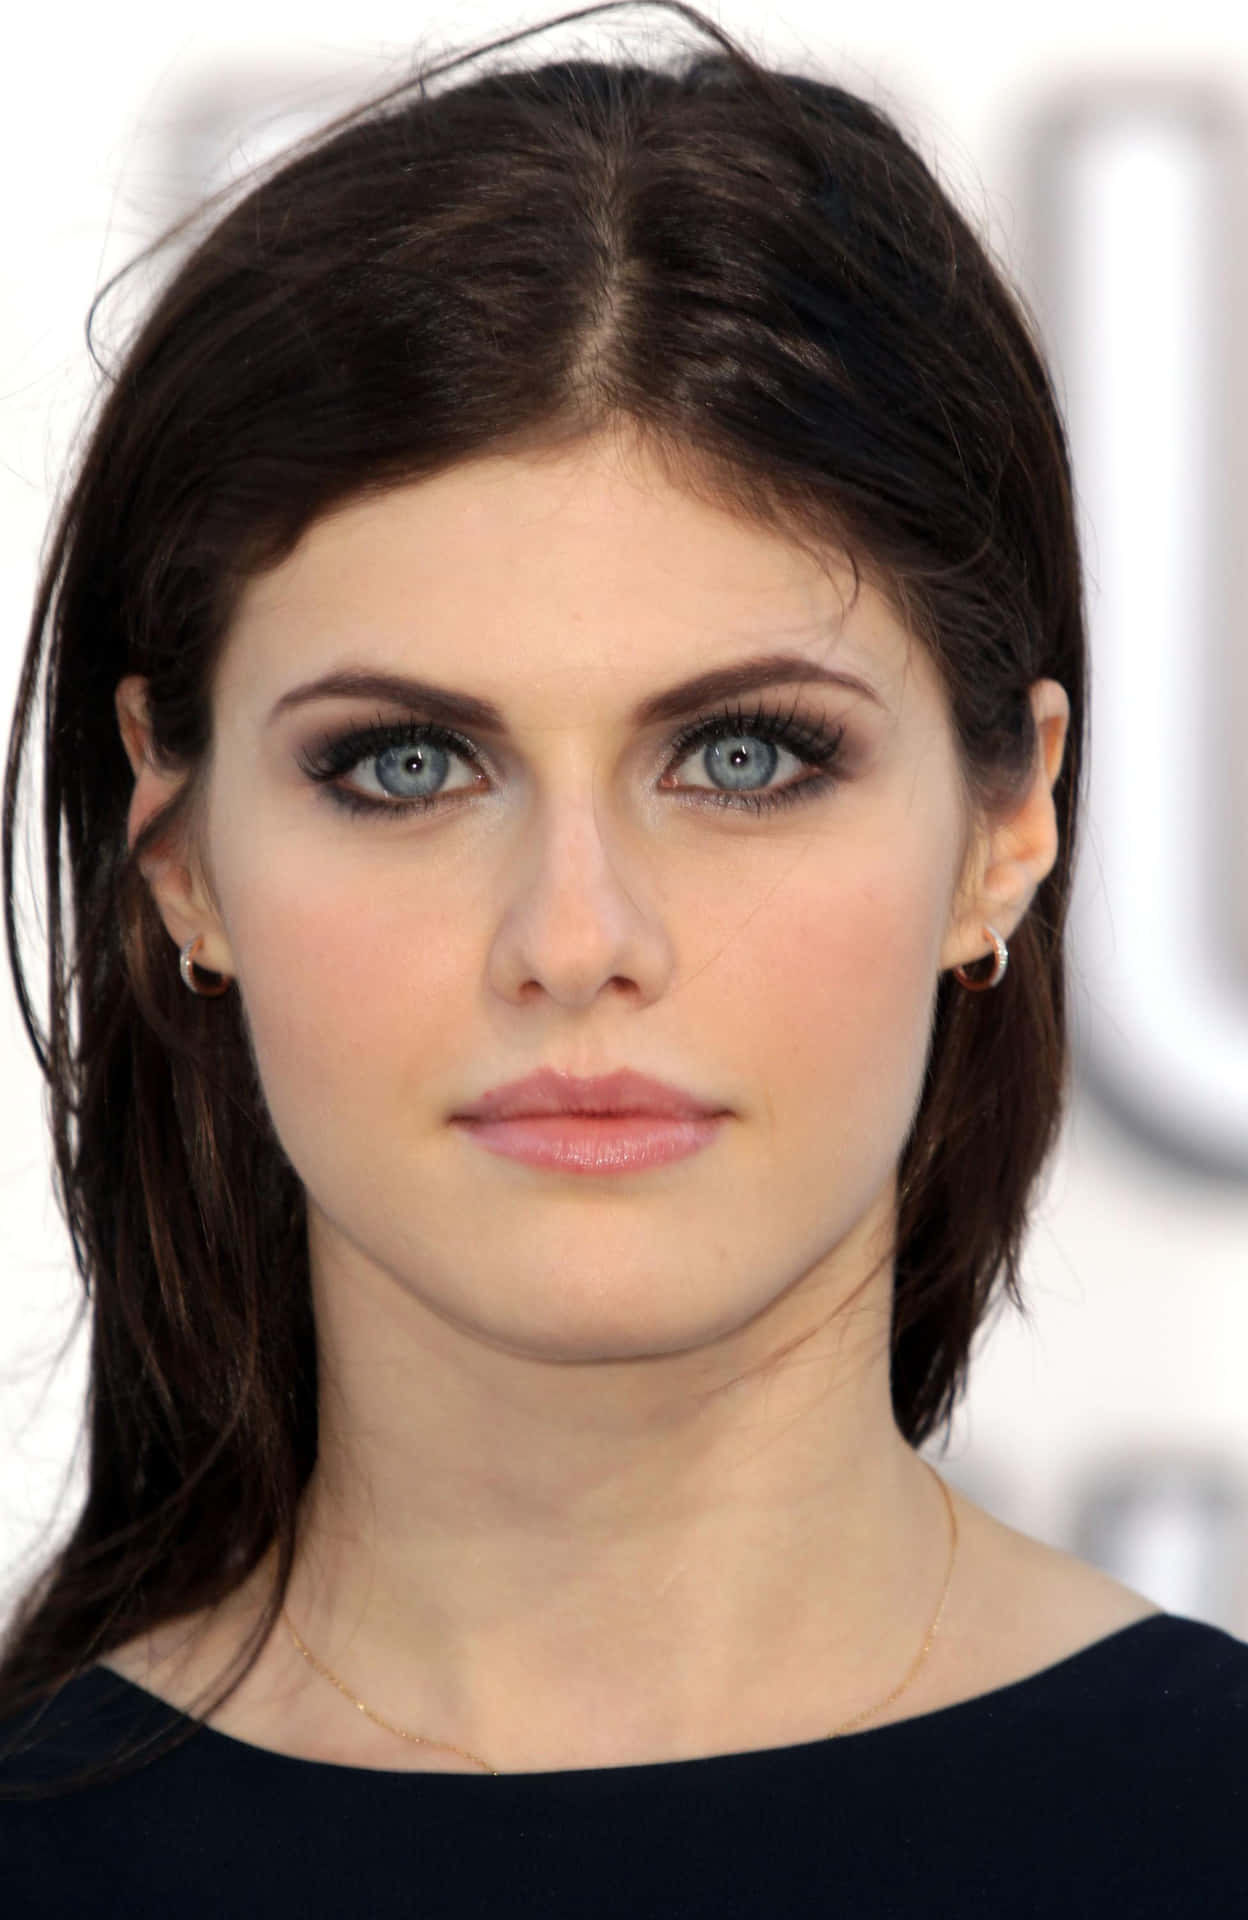 Alexandra Daddario: The Stunning Actress You Need to Know, by Claire  Anderson